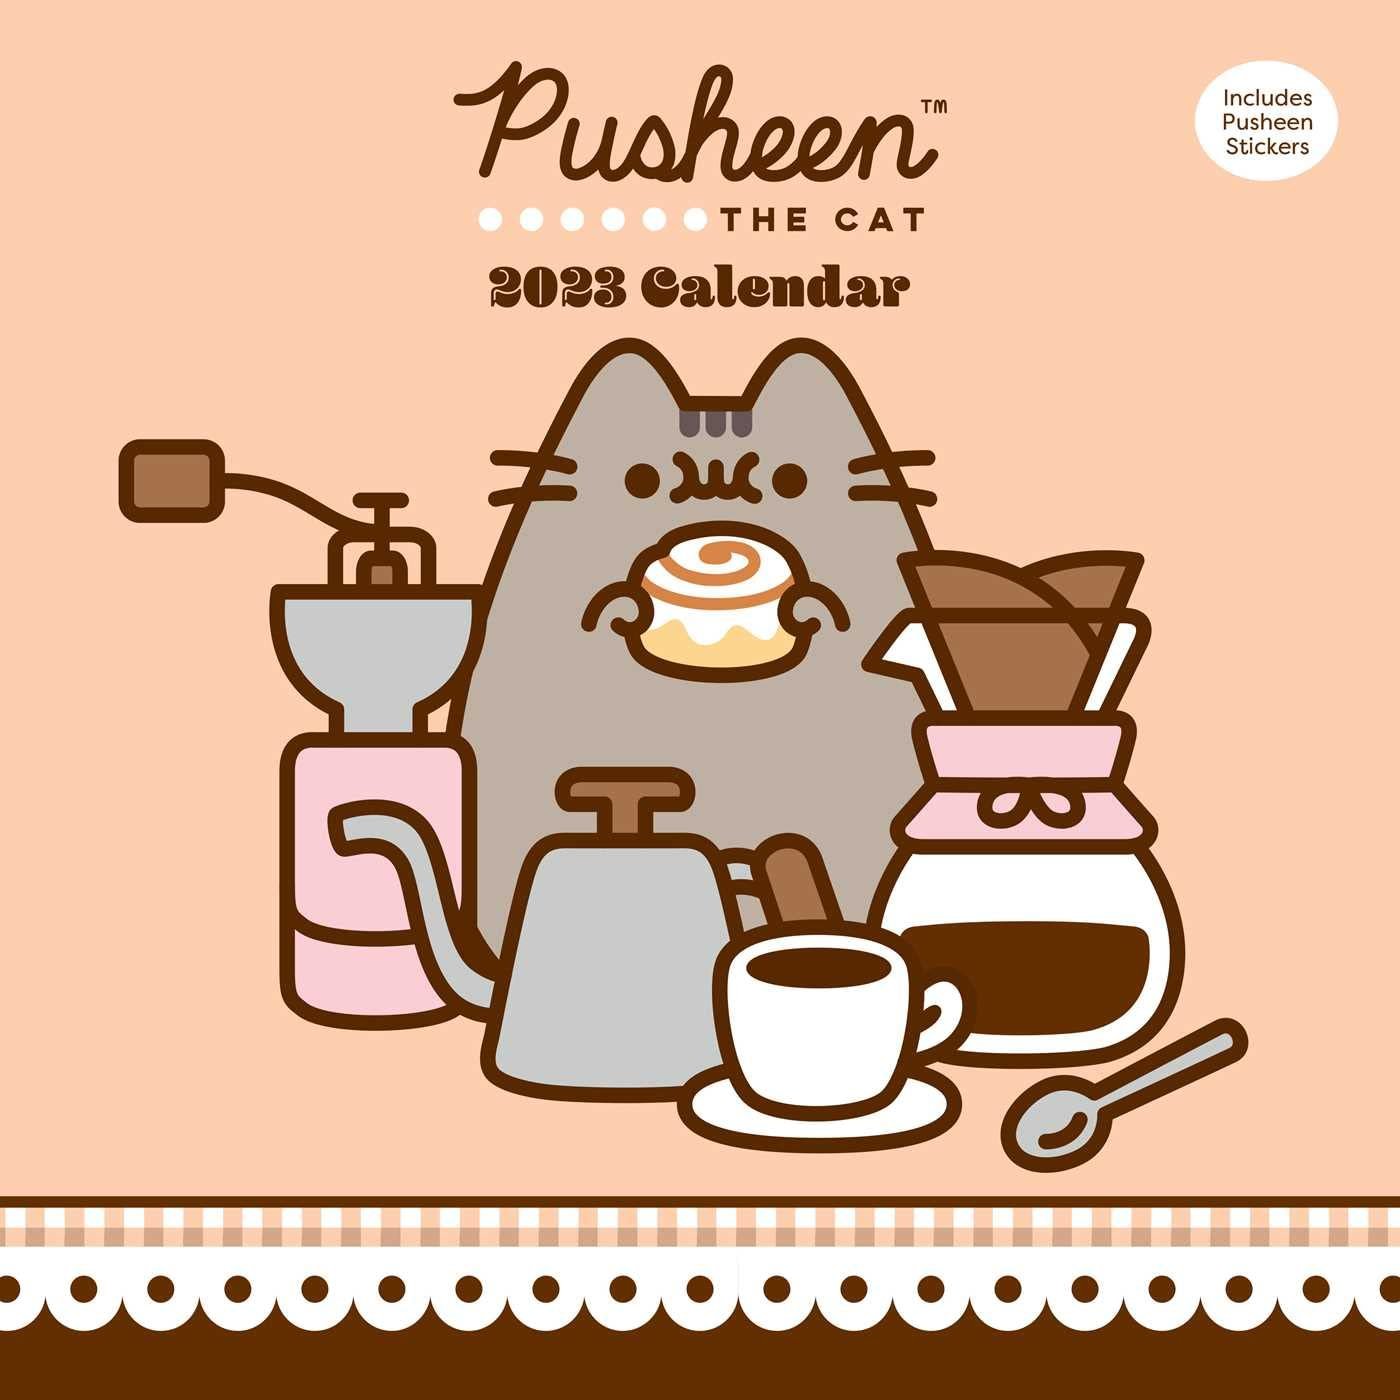 Features charming artwork from Pusheen's Patisserie in scrumptious shades of caramel, mocha, cinnamon, and signature pink. 